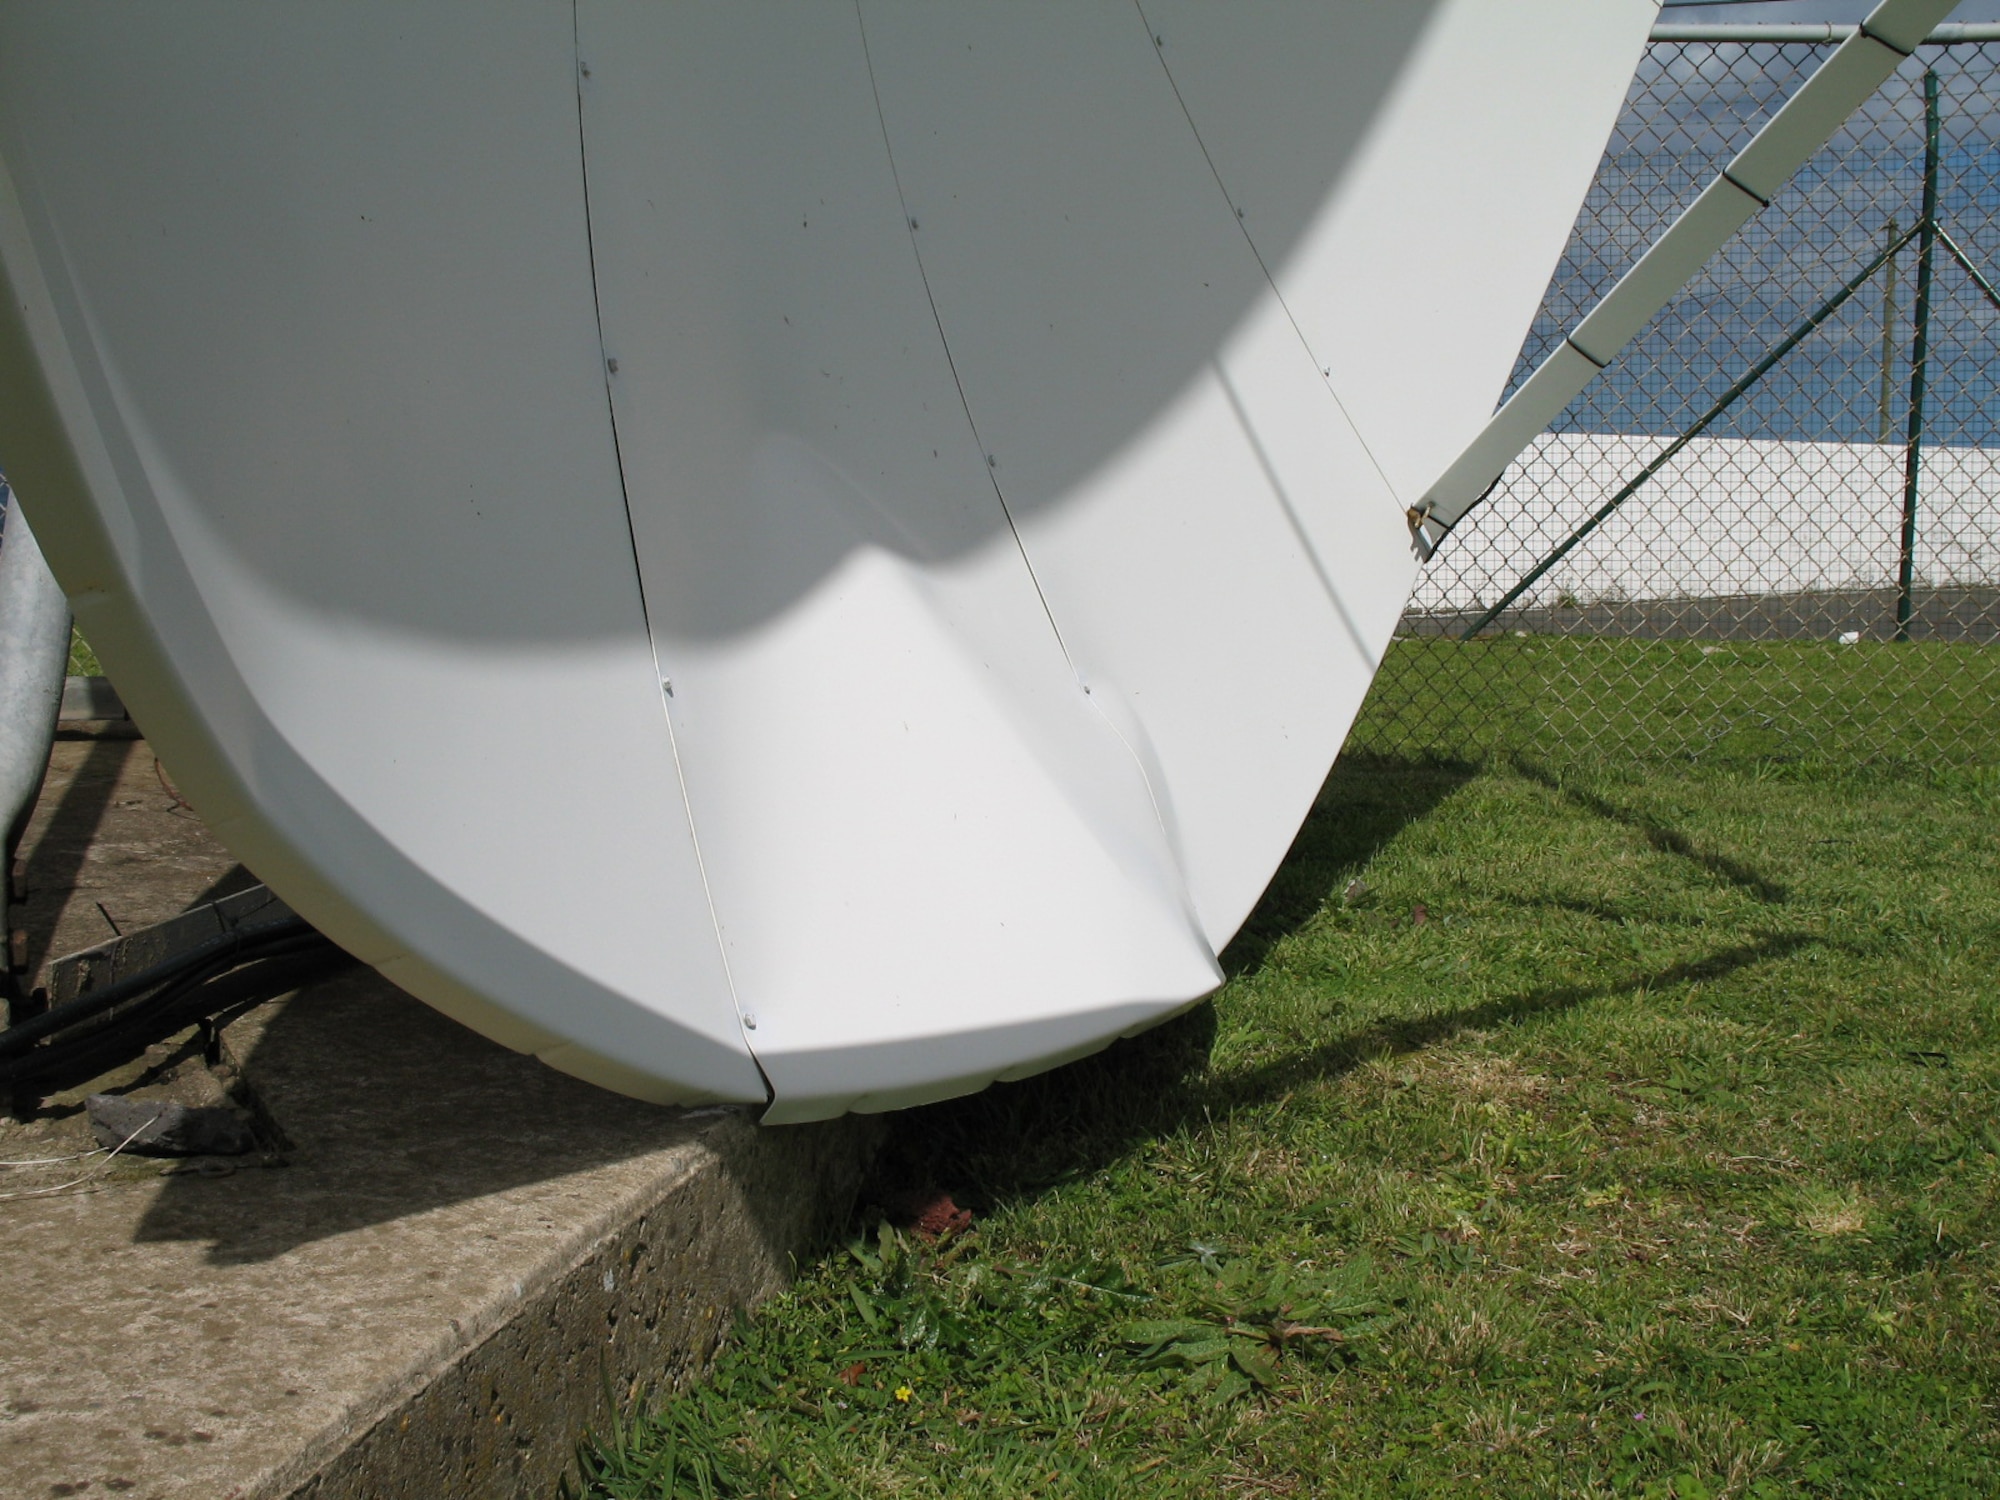 The AFN satellite was damaged by high winds. (Photo by Staff Sgt. Troy Bolling)